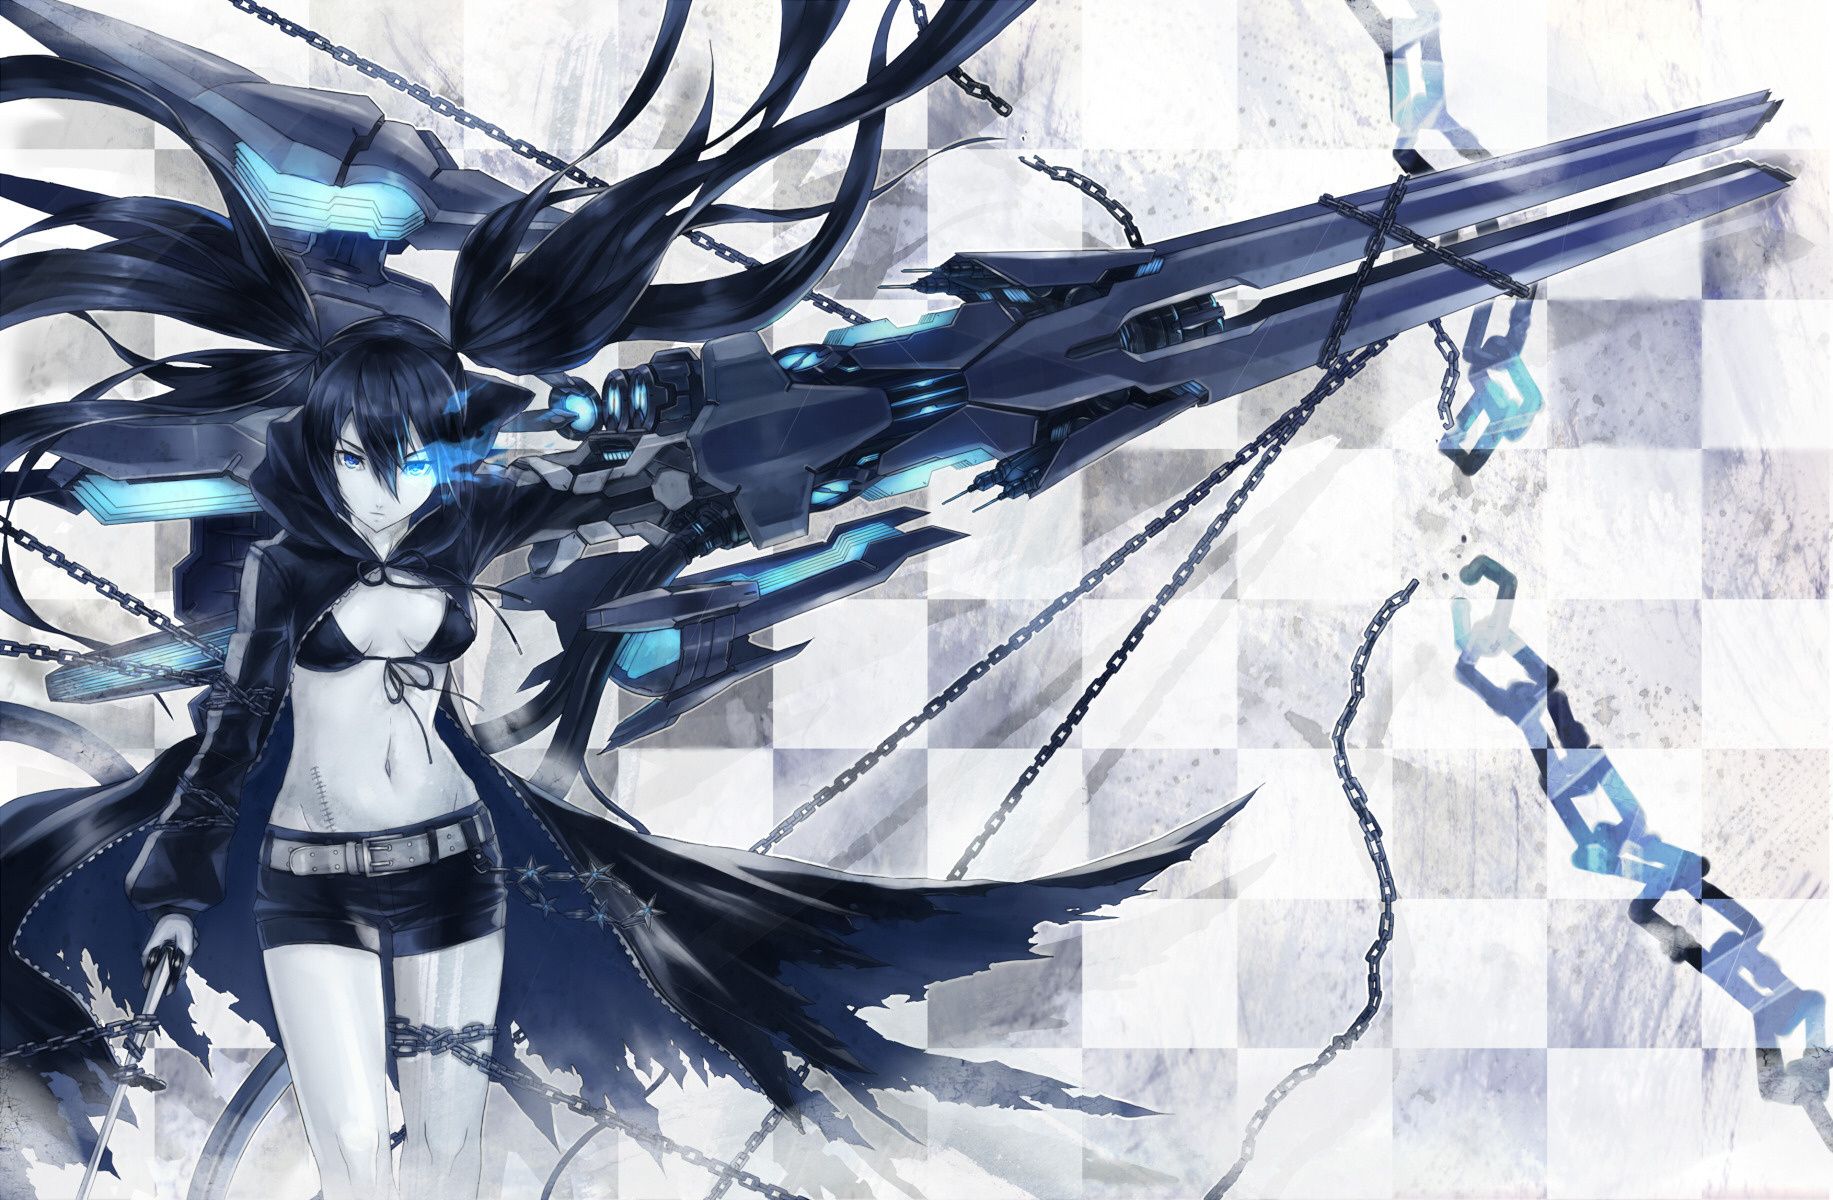 Wallpaper. Anime. photo. picture. girl, chain, blue, The sword, weapons